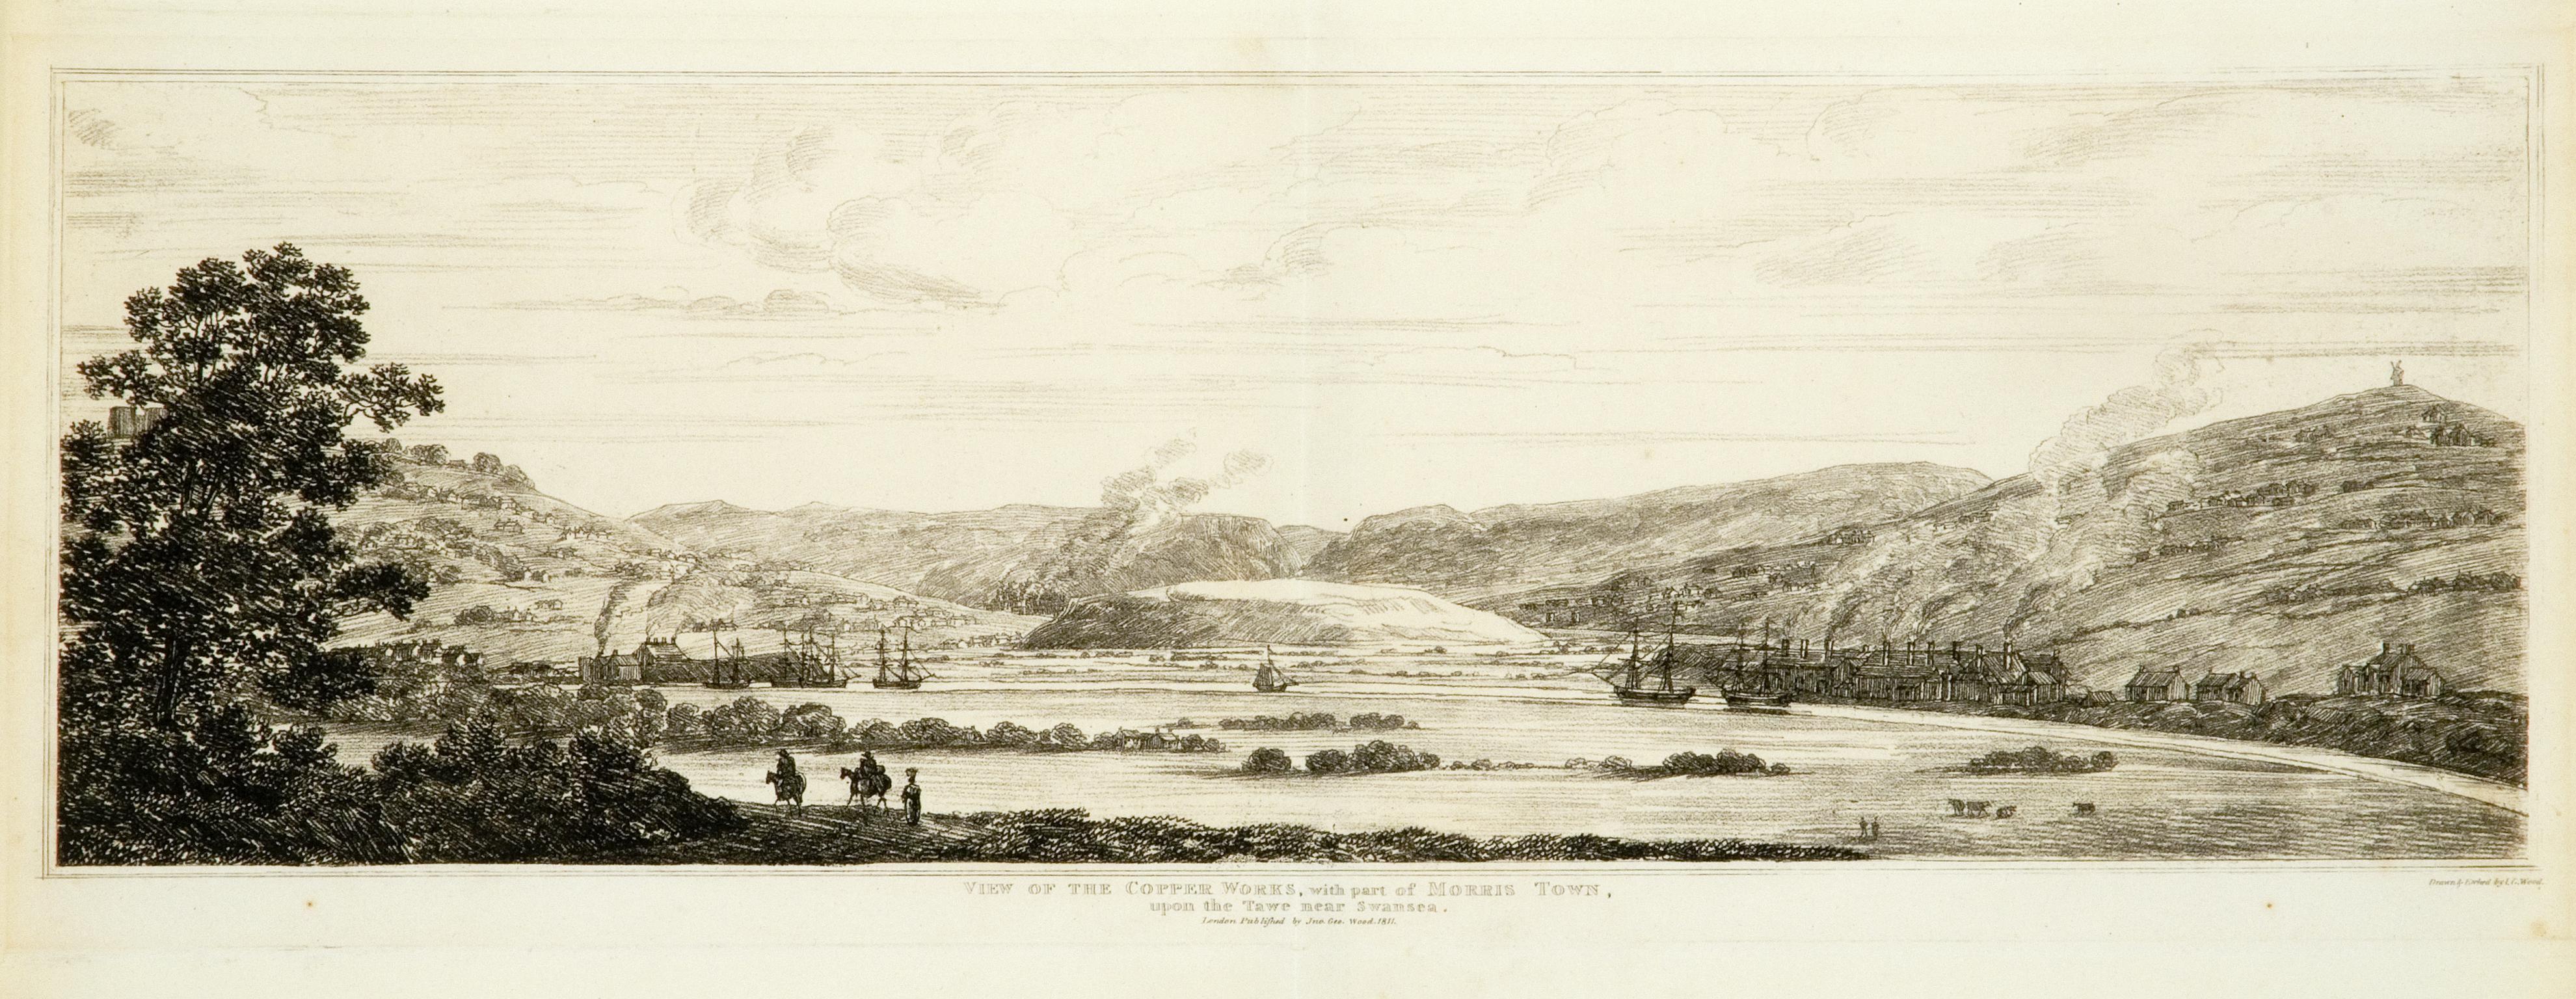 View of the Copper Works, with part of Morris Town, upon the Tawe near Swansea (print)